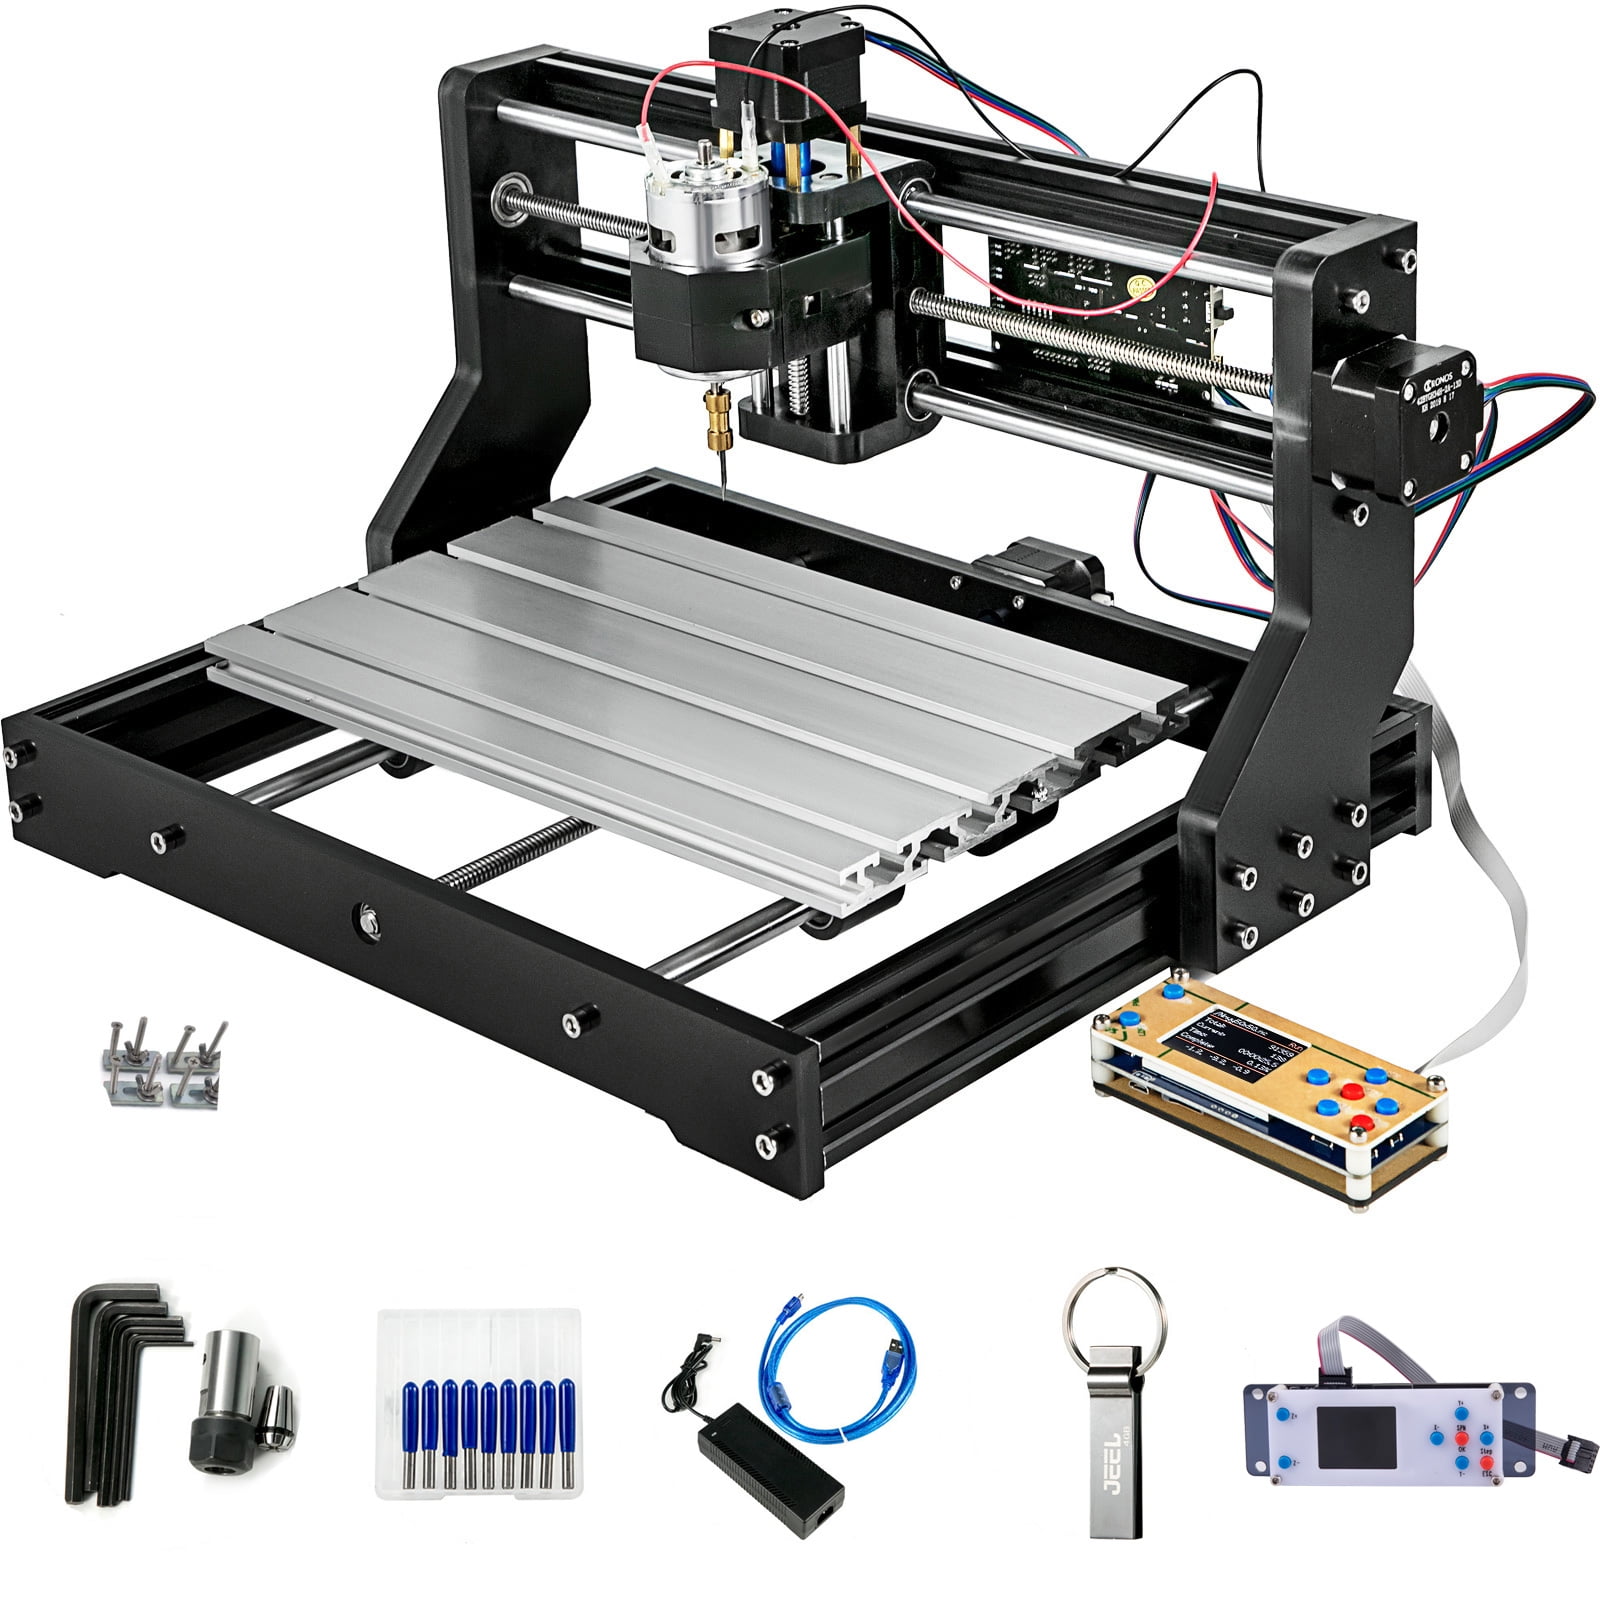 VEVOR CNC 3018-PRO 3 Axis CNC Router Kit GRBL Control with Offline  Controller Plastic Acrylic PCB PVC Wood Carving Milling Engraving Machine  XYZ Working Area 300x180x45mm 